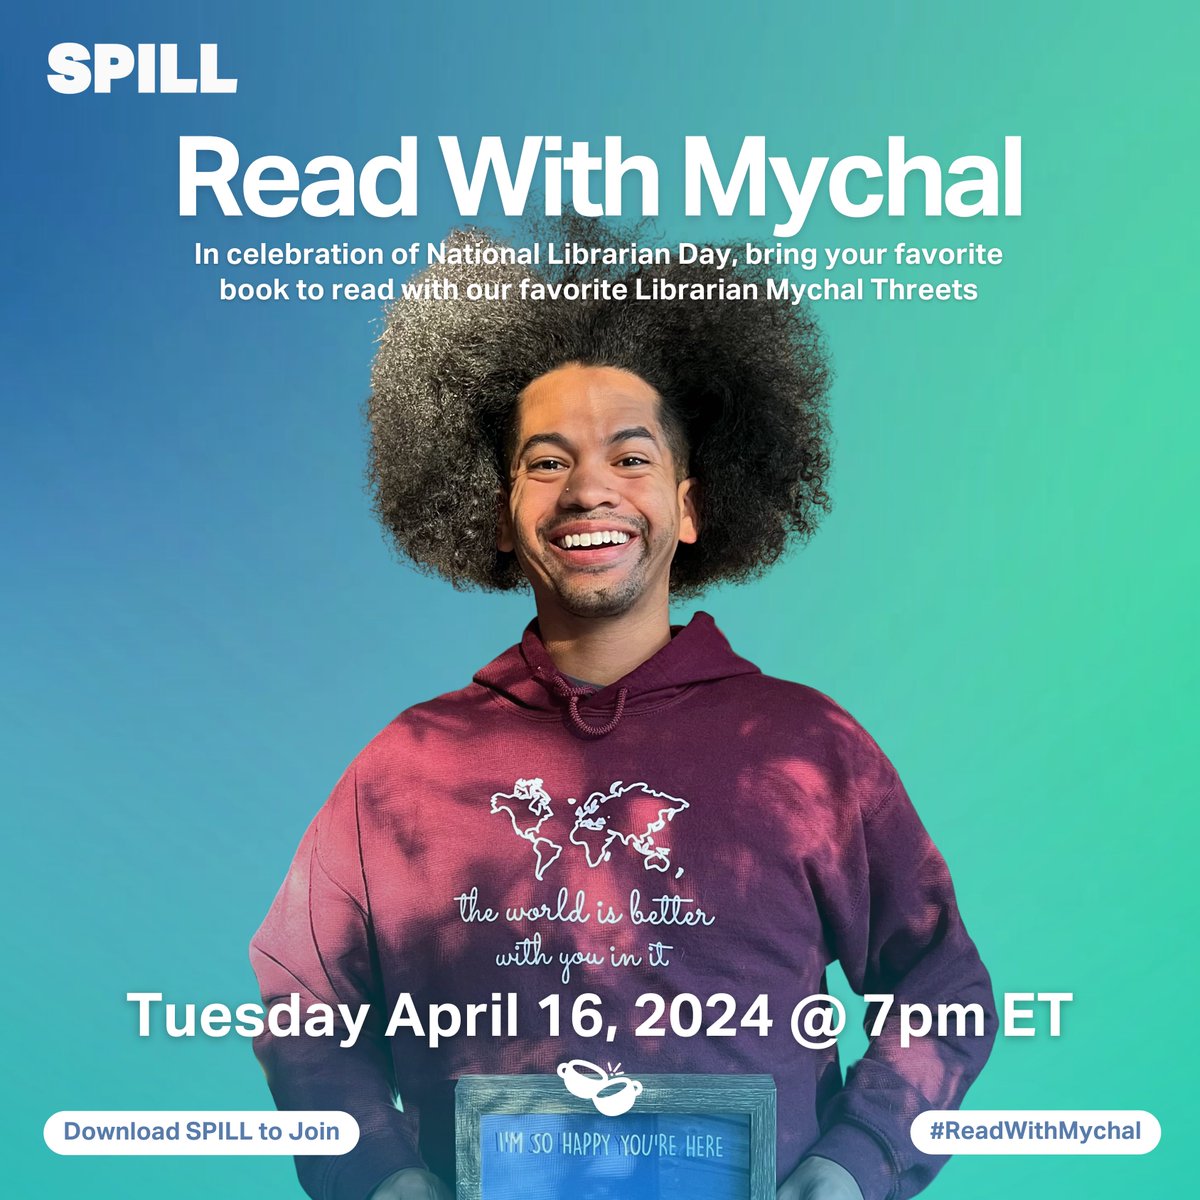 In celebration of #NationalLibrarianDay, bring your favorite book to read with our favorite Librarian @mychal3ts while chatting about the importance of literacy, access to information, & the vital role librarians play in fostering a love for reading & lifelong learning.

Tuesday…